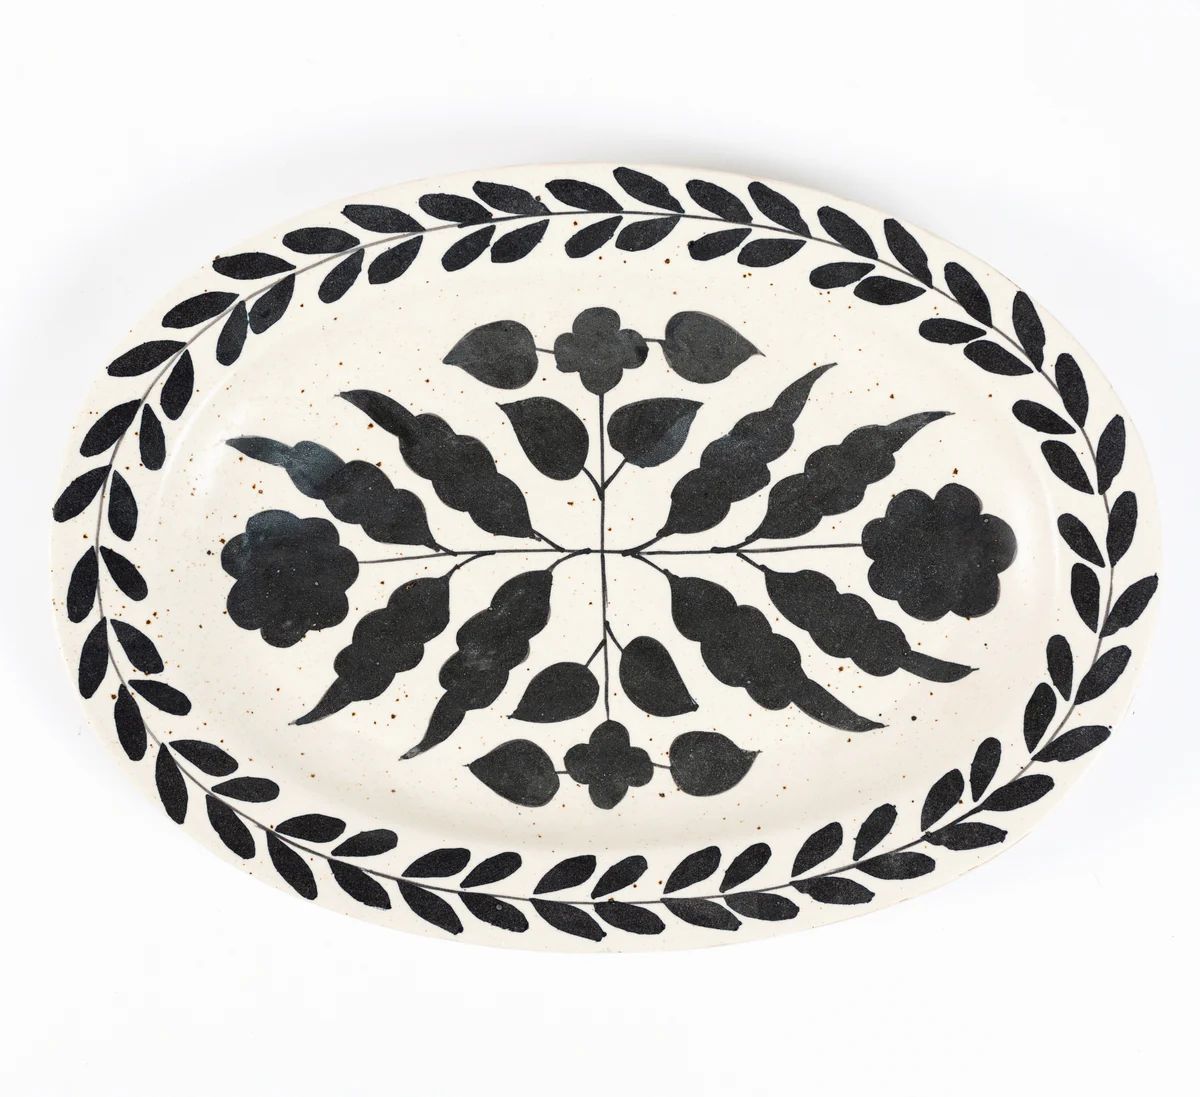 Sofia Hand-Painted Stoneware Platter | Stoffer Home